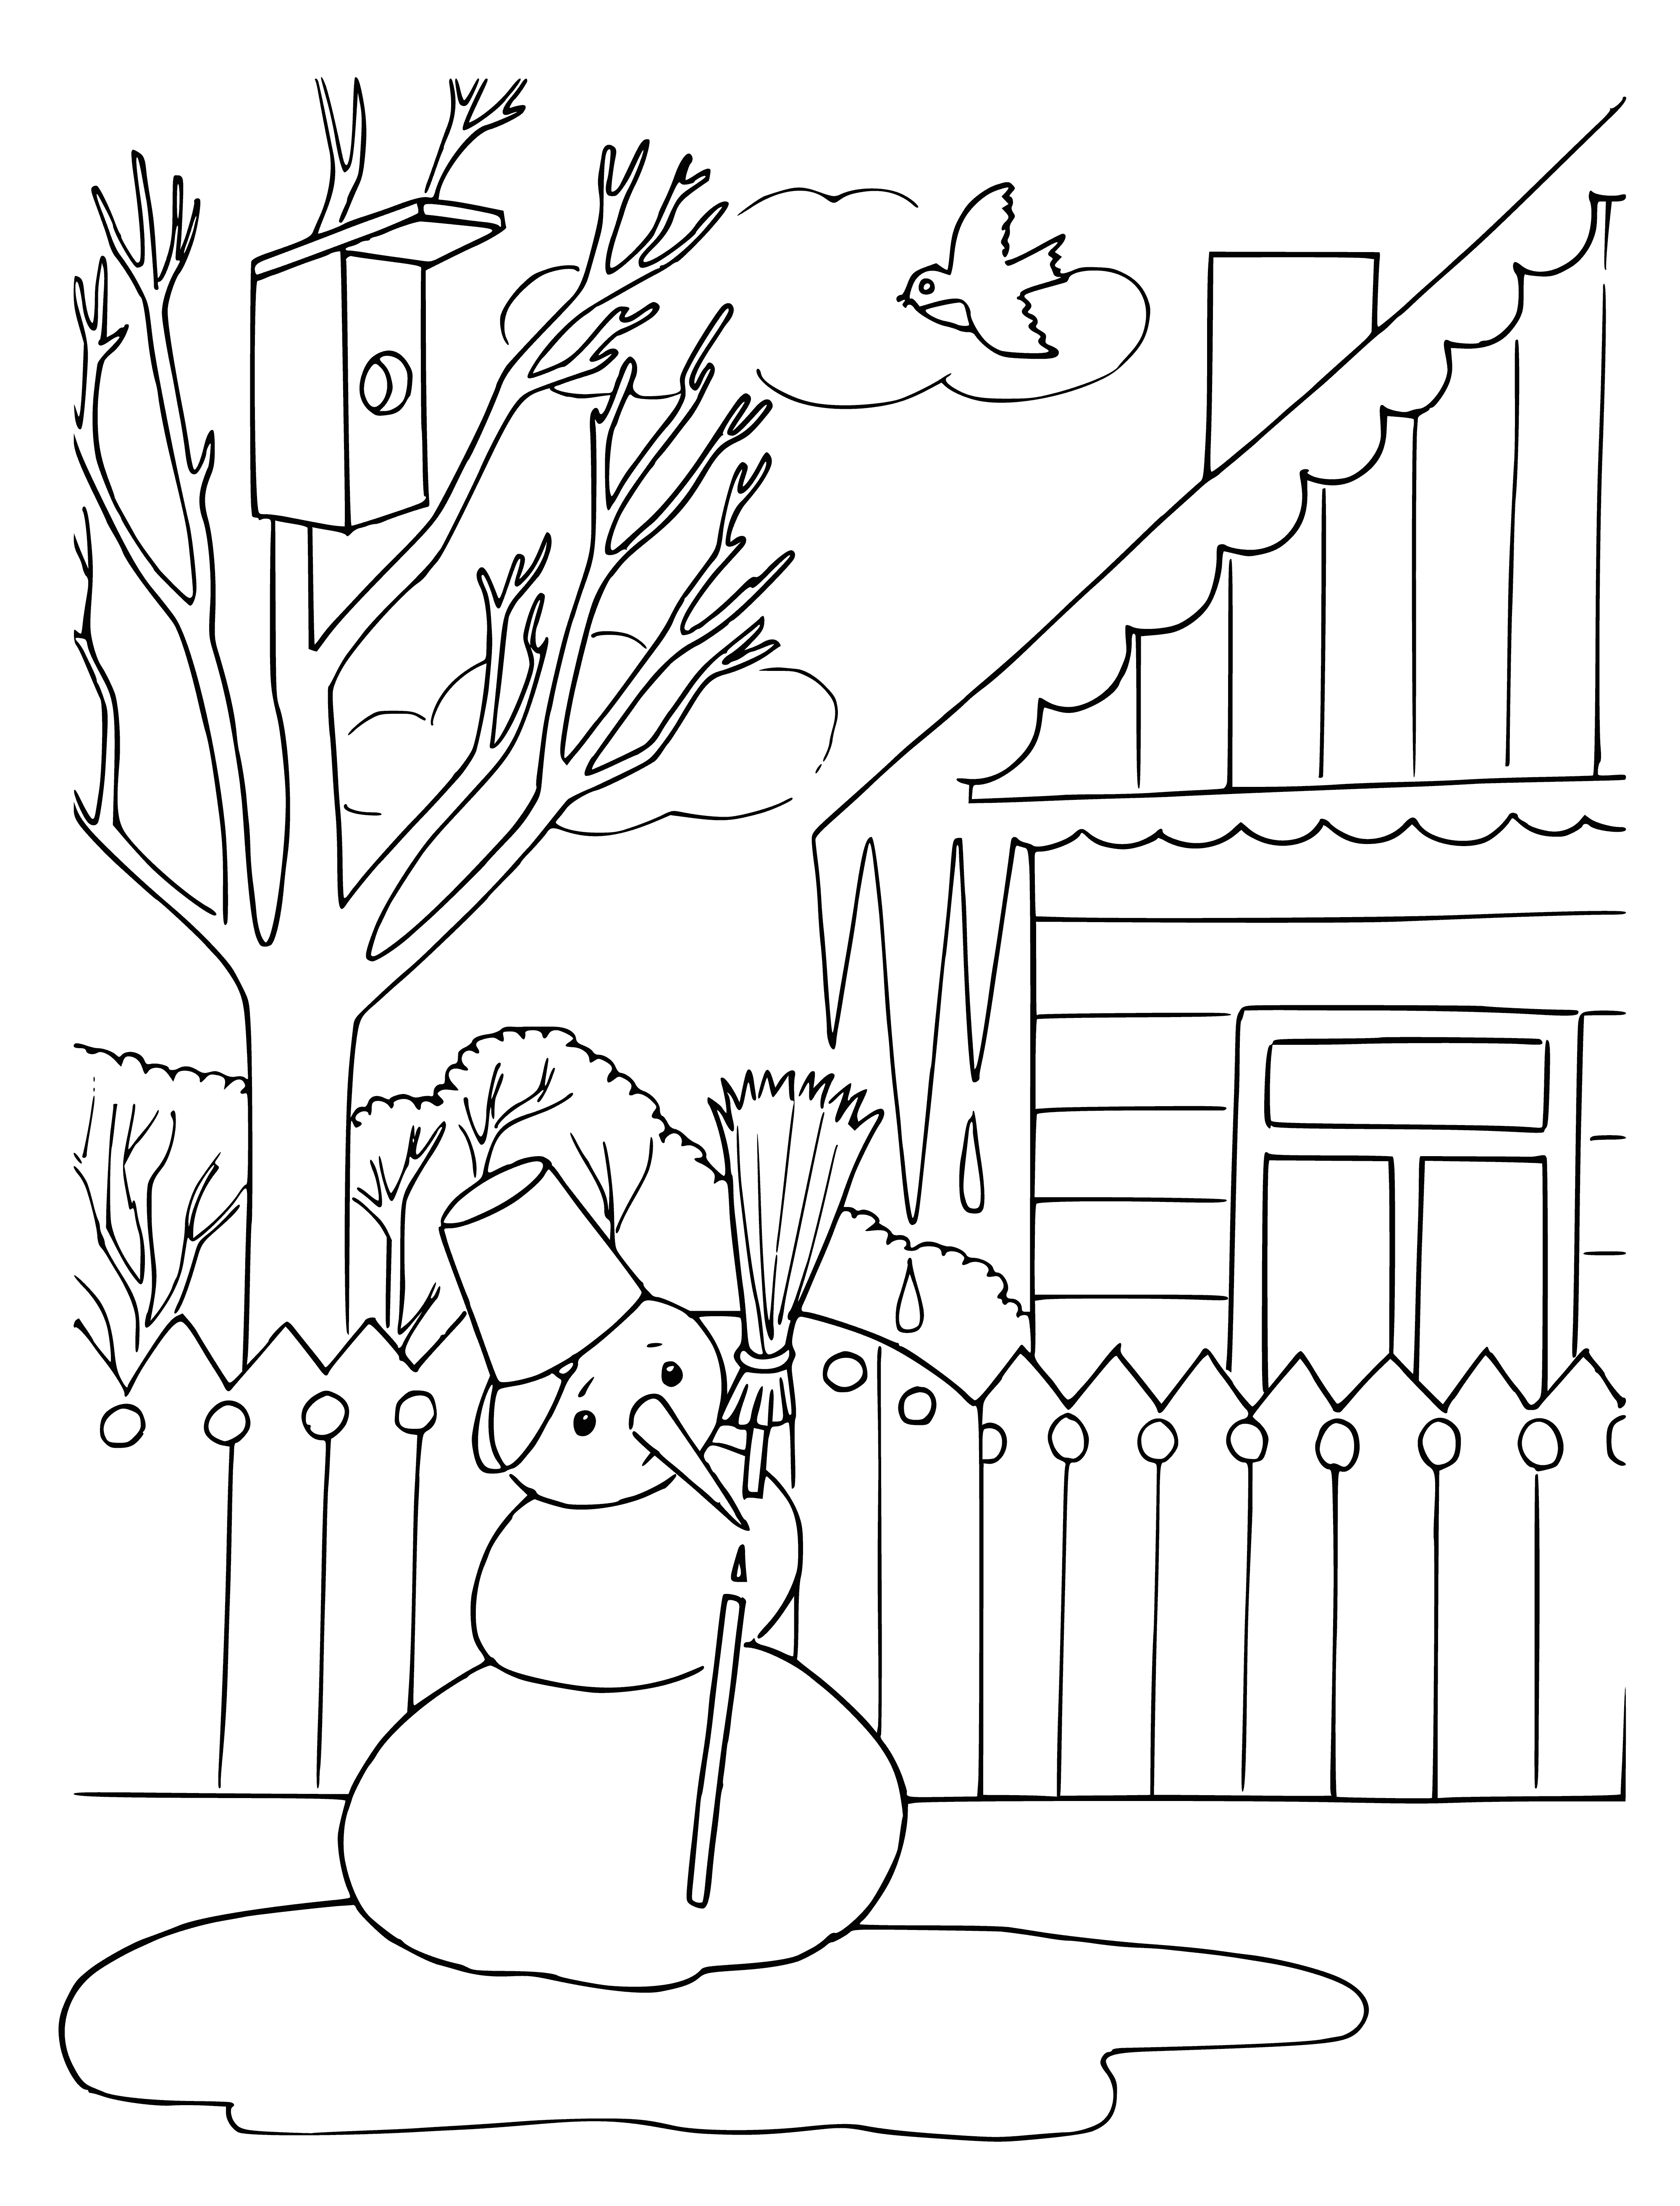 coloring page: A melting snowman is surrounded by water with his hat on the ground.